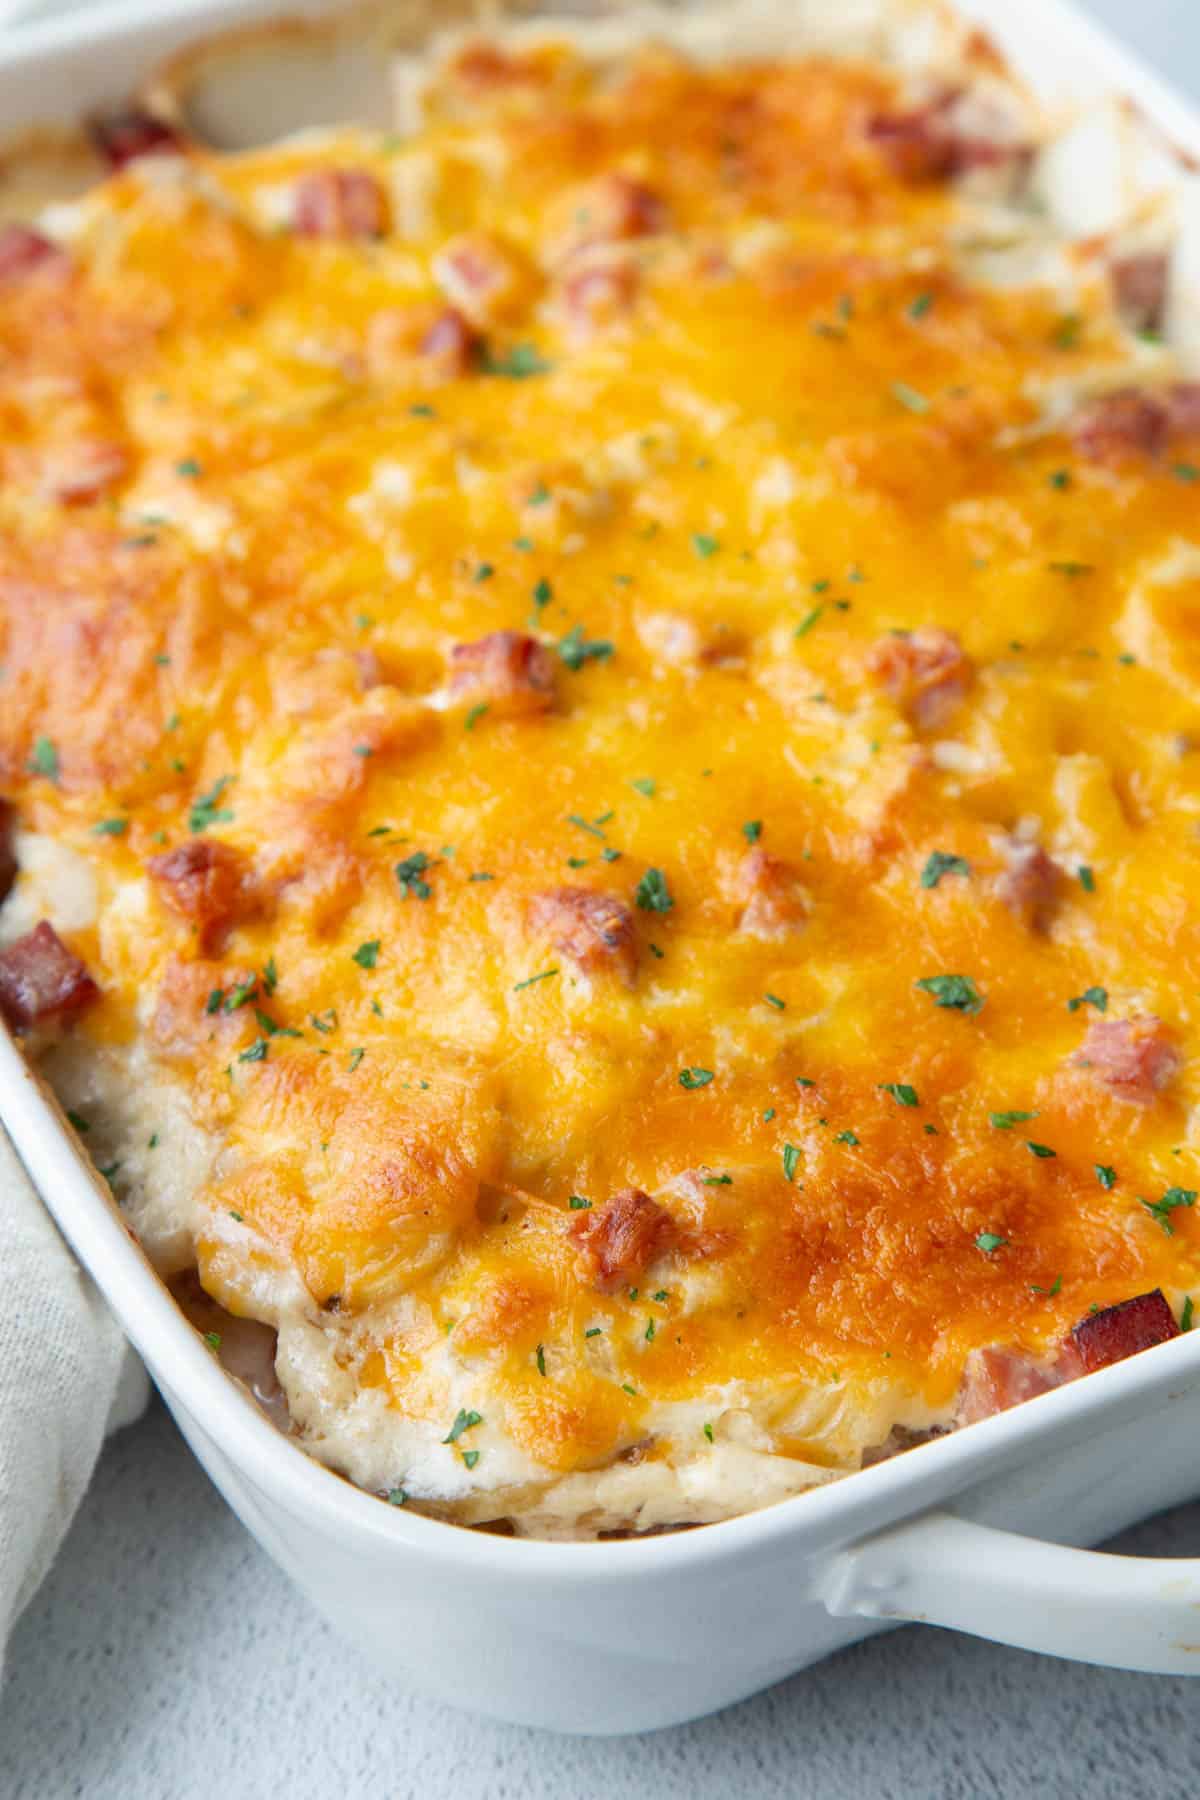 scalloped potatoes topped with cheese in a white casserole dish.